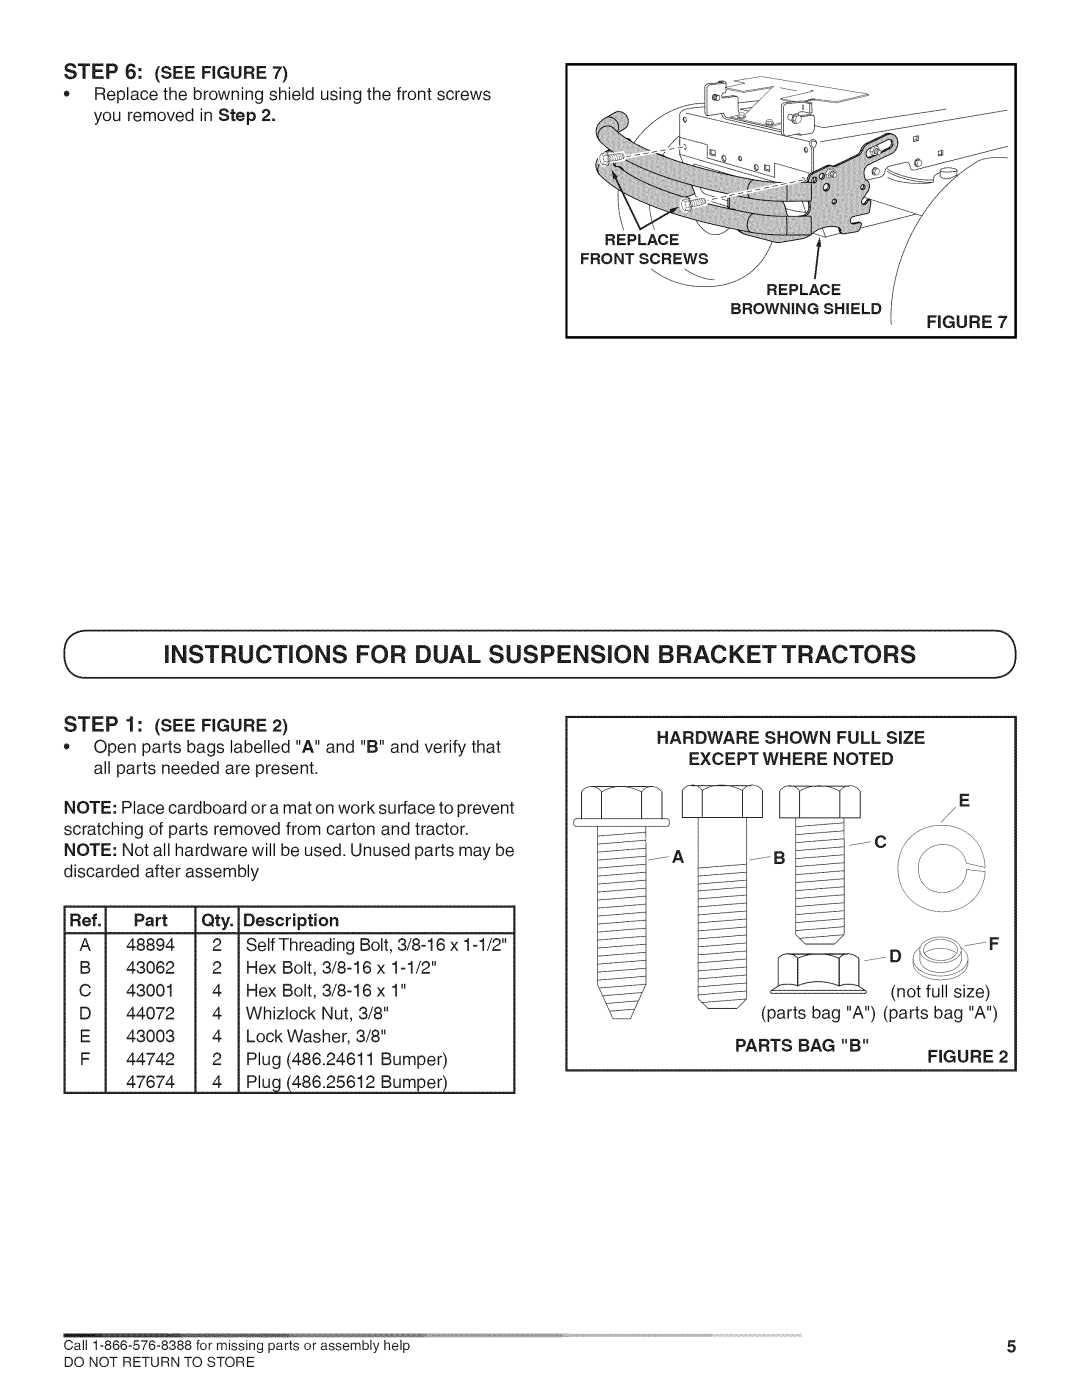 Craftsman 486.24611, 486.24612 manual iNSTRUCTiONS FOR DUAL SUSPENSION BRACKET TRACTORS, See Figure 